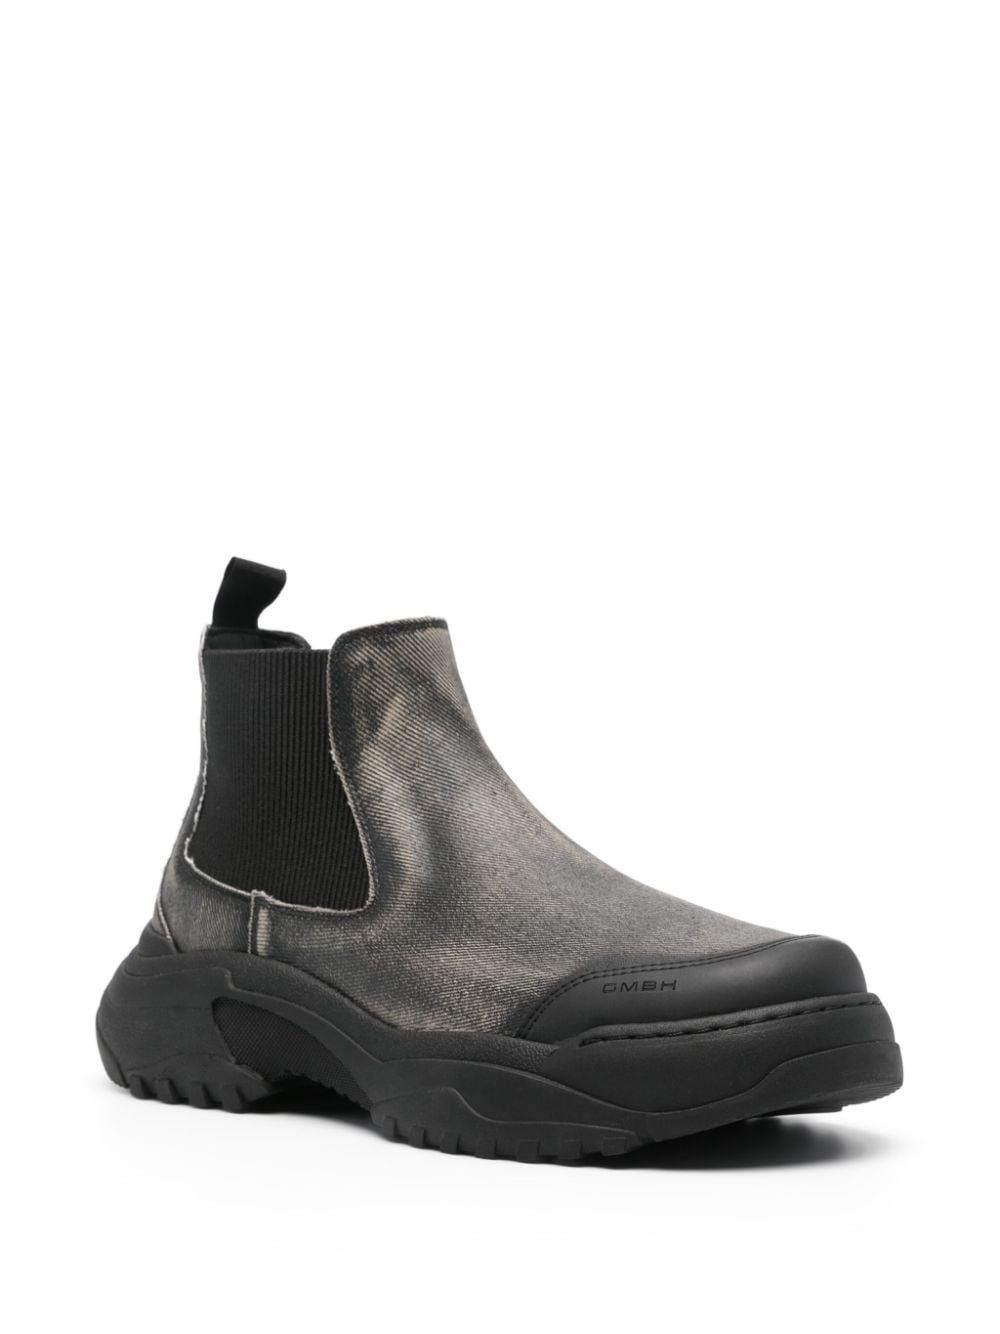 Shop Gmbh Stonewashed Chelsea Boots In Black